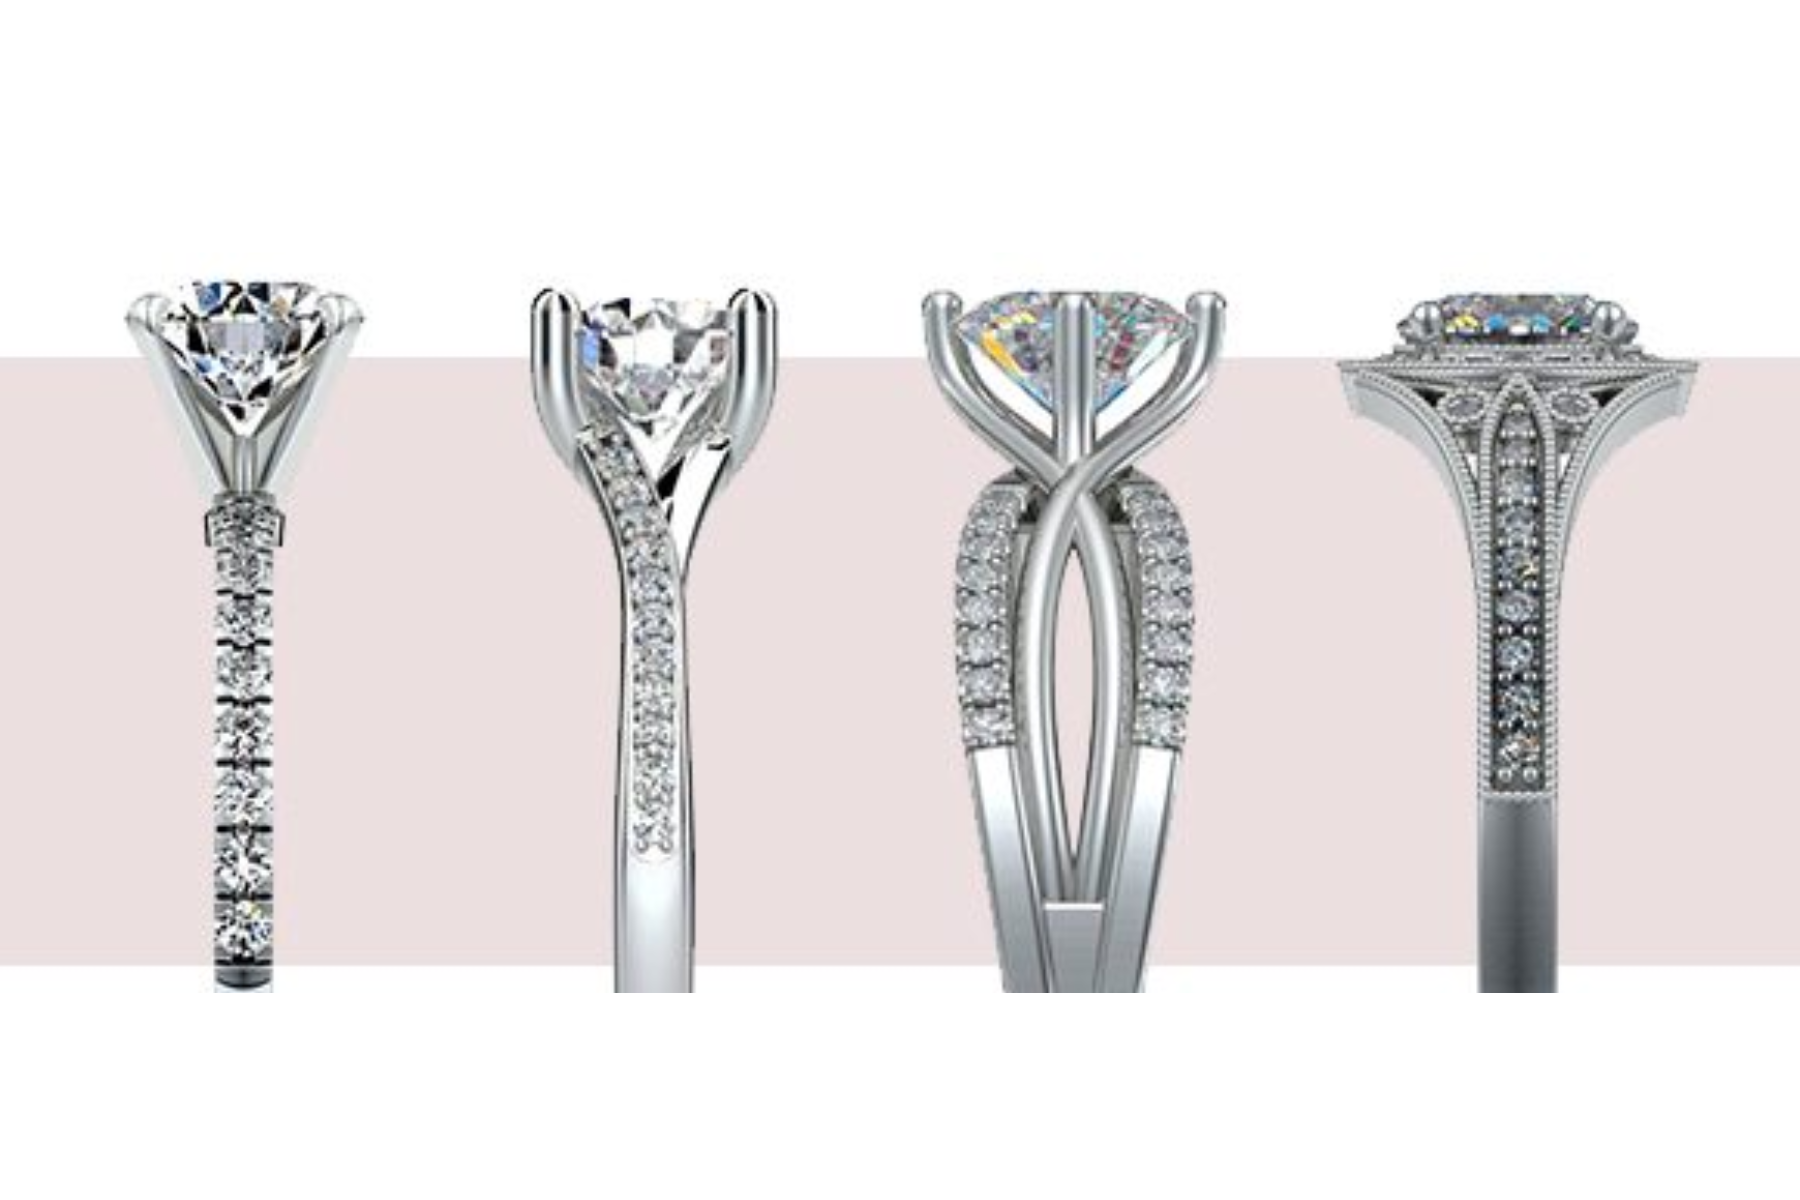 The image shows four different types of pave engagement rings